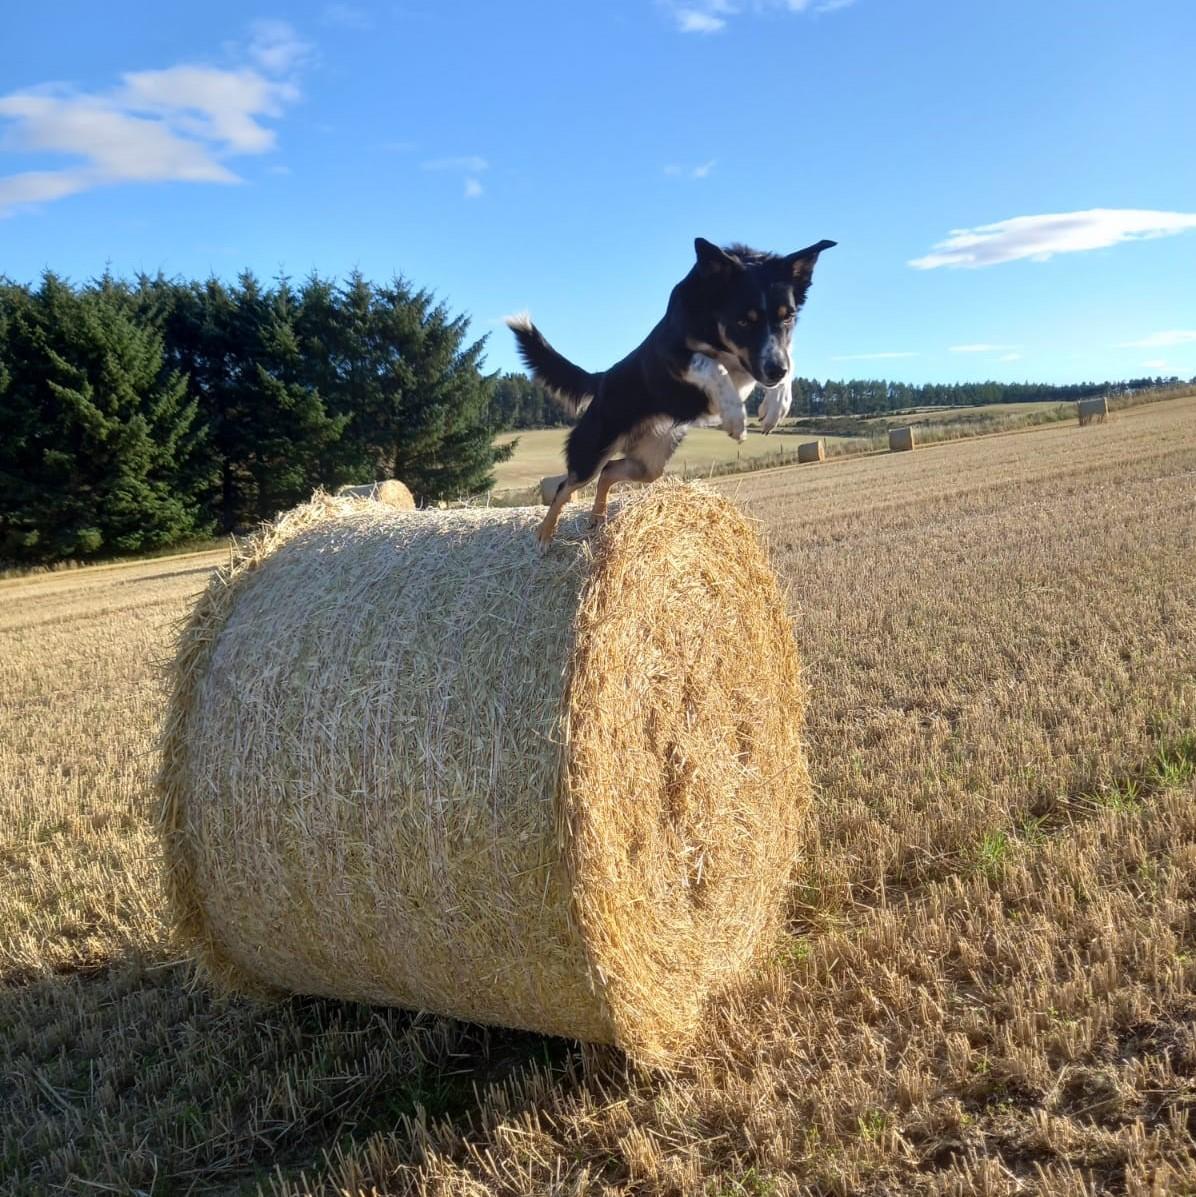 Gwen Dick (Dunrovin. North Eddieston, Skene, Westhill) - A photo of Kim our collie enjoying jumping from the bales when harvest finished